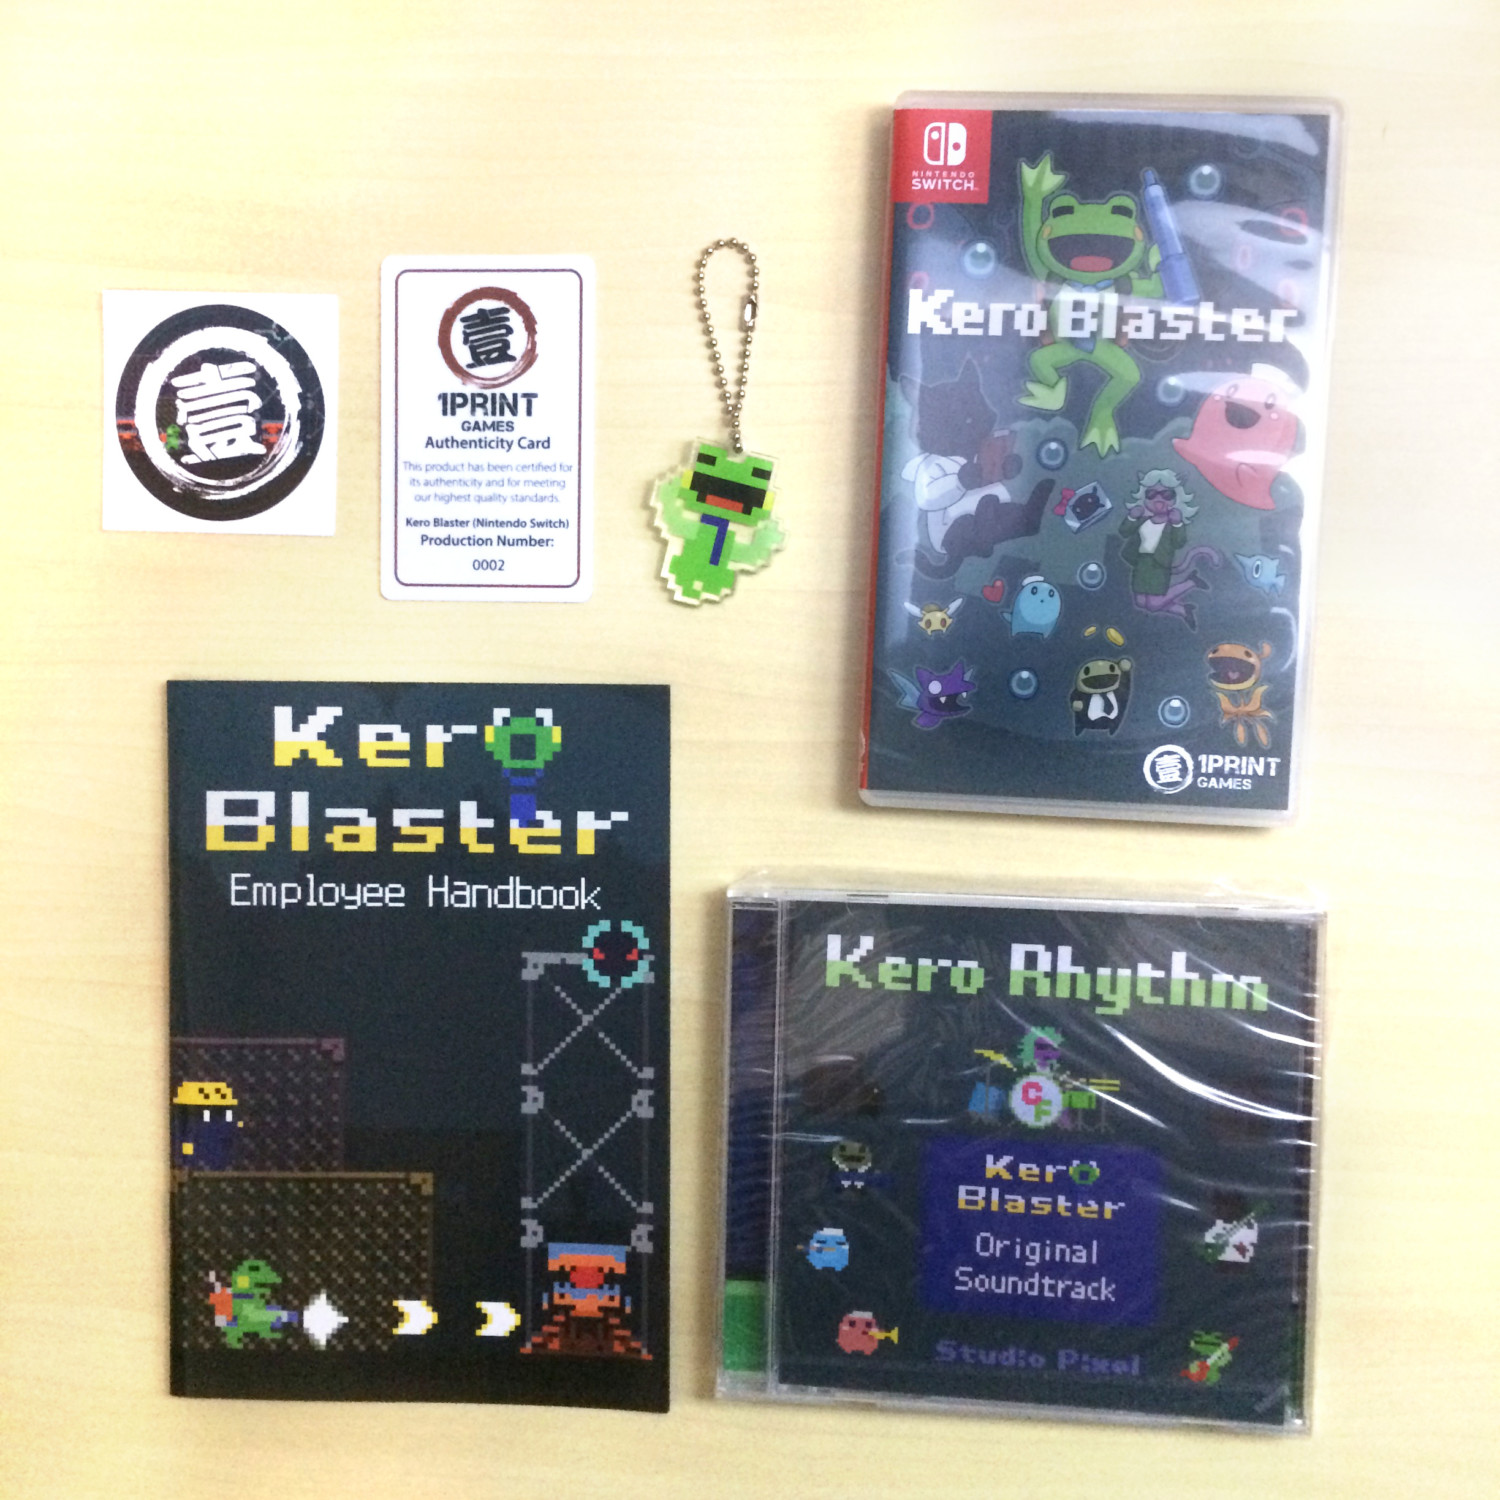 NintendoSoup Giveaway: Kero Blaster Limited Edition Autographed By